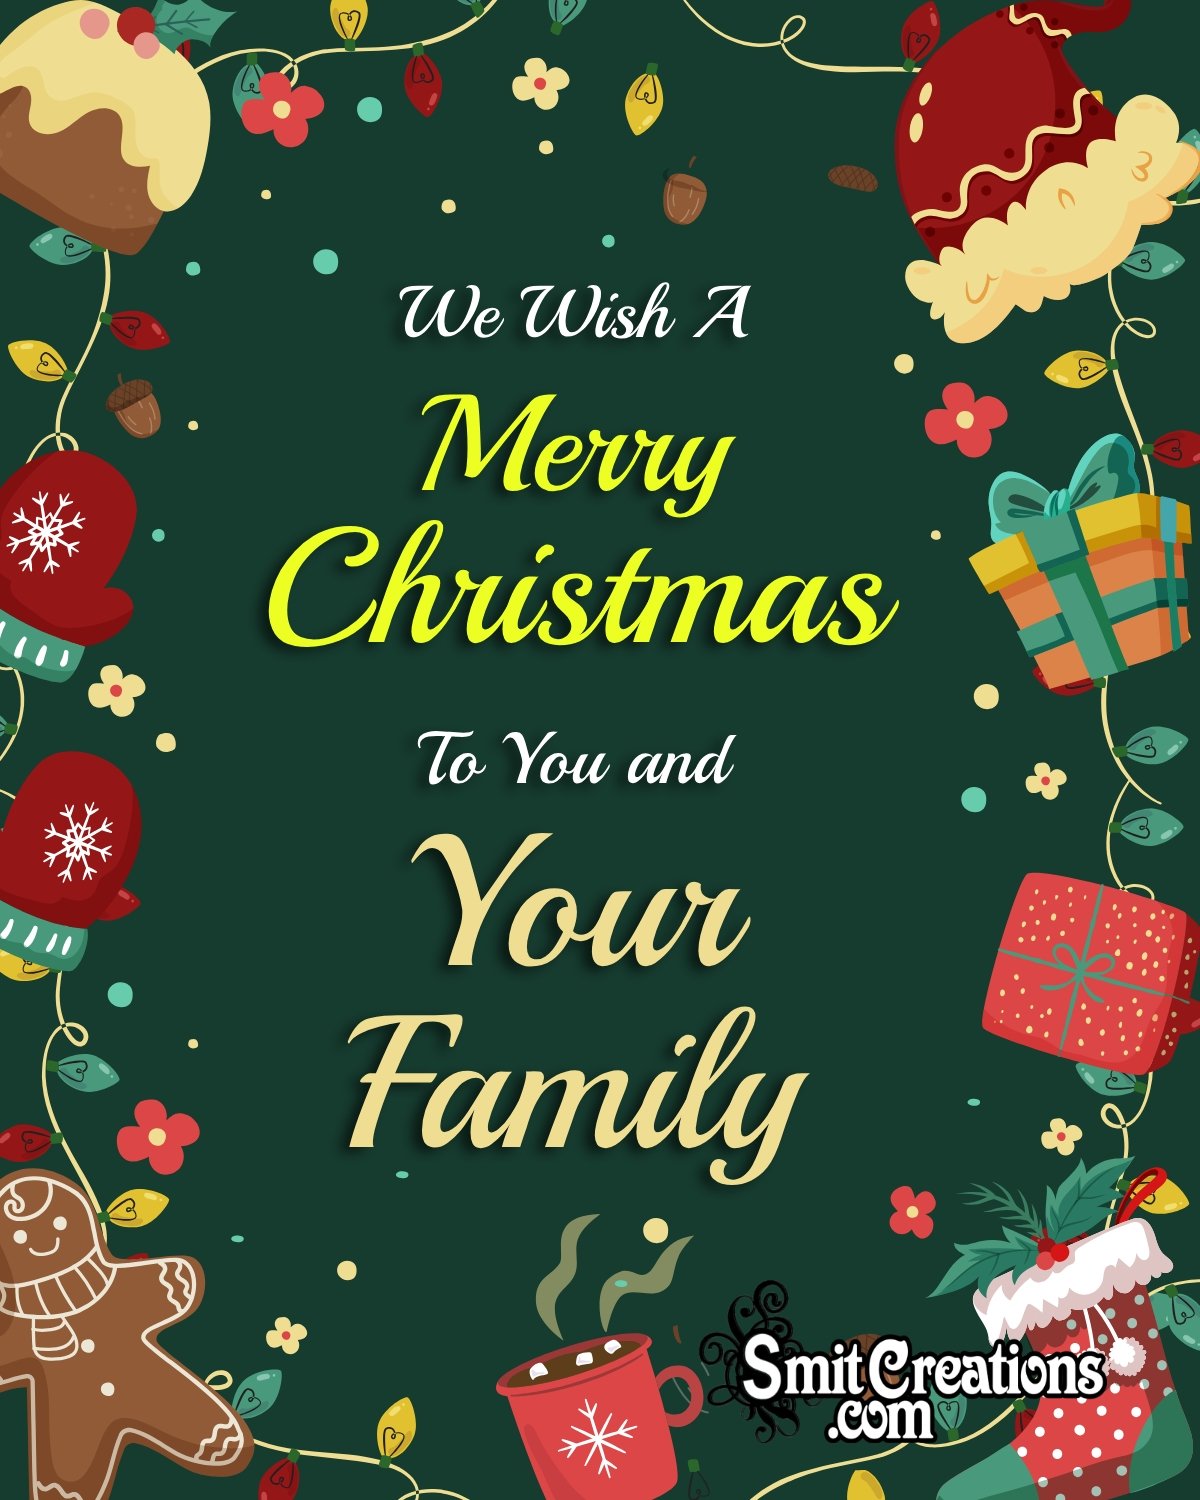 We Wish A Merry Christmas To You And Your Family